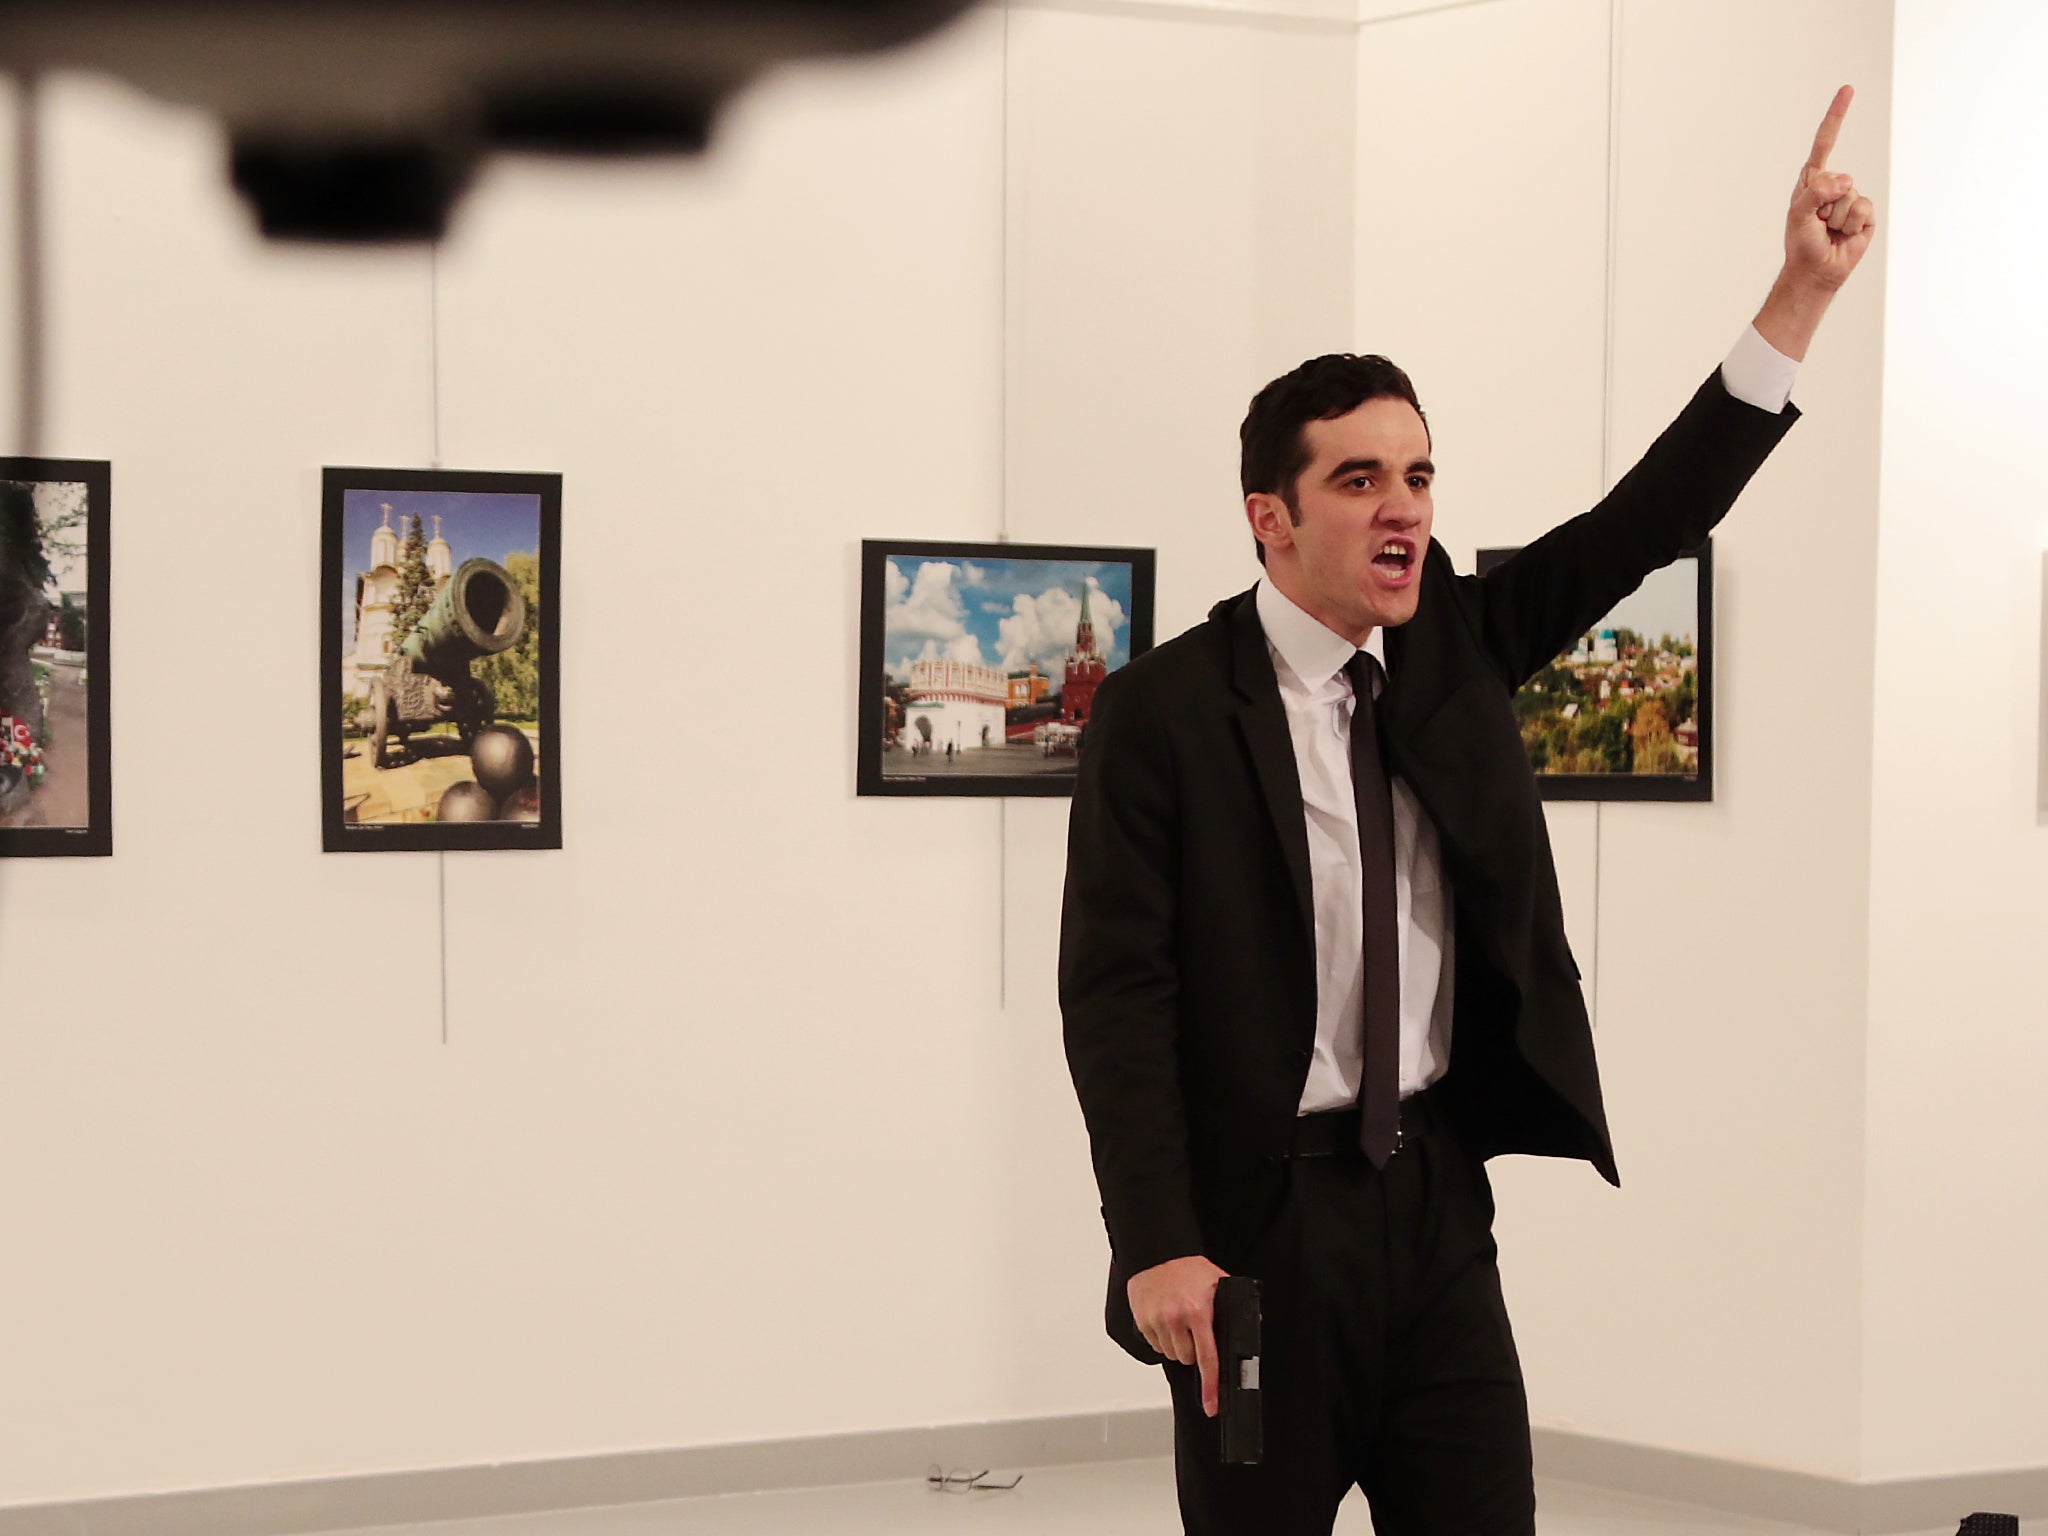 A man gestures near to the body of a man at a photo gallery in Ankara, Turkey